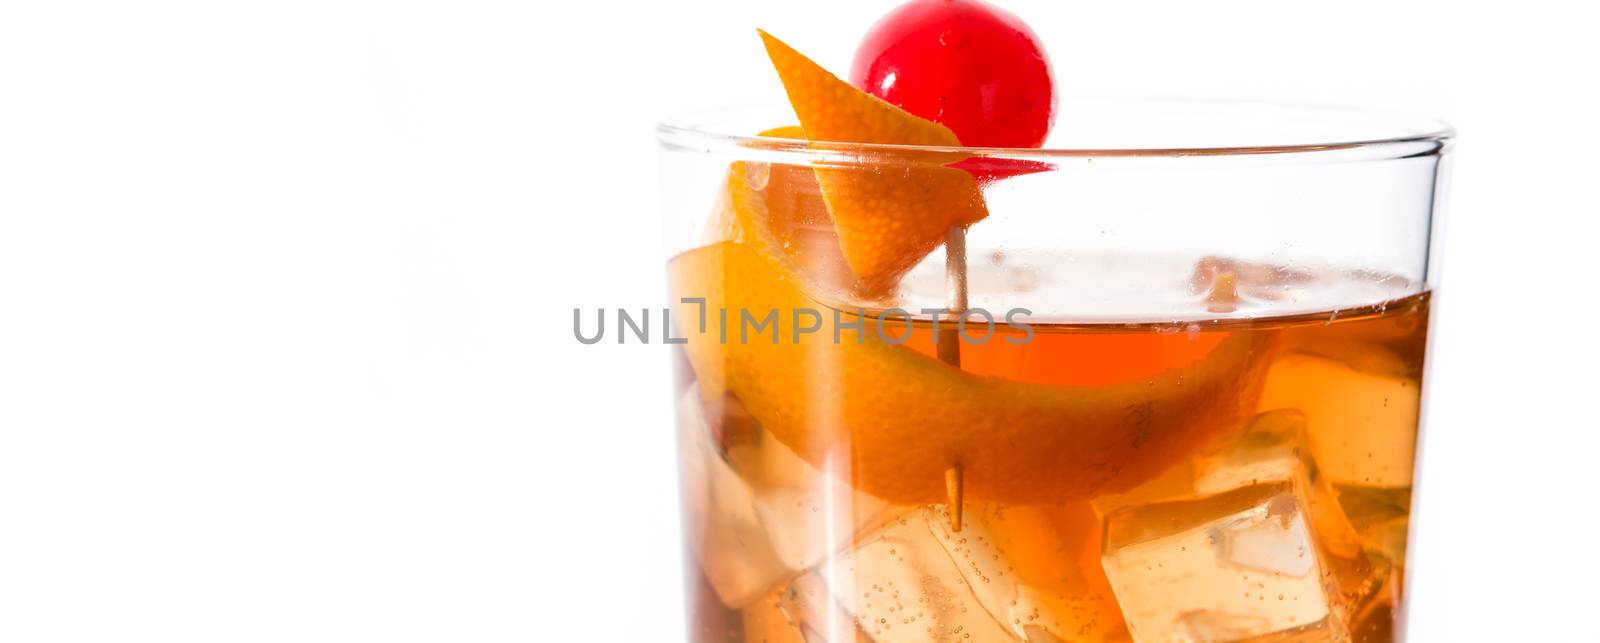 Old fashioned cocktail with orange and cherry by chandlervid85